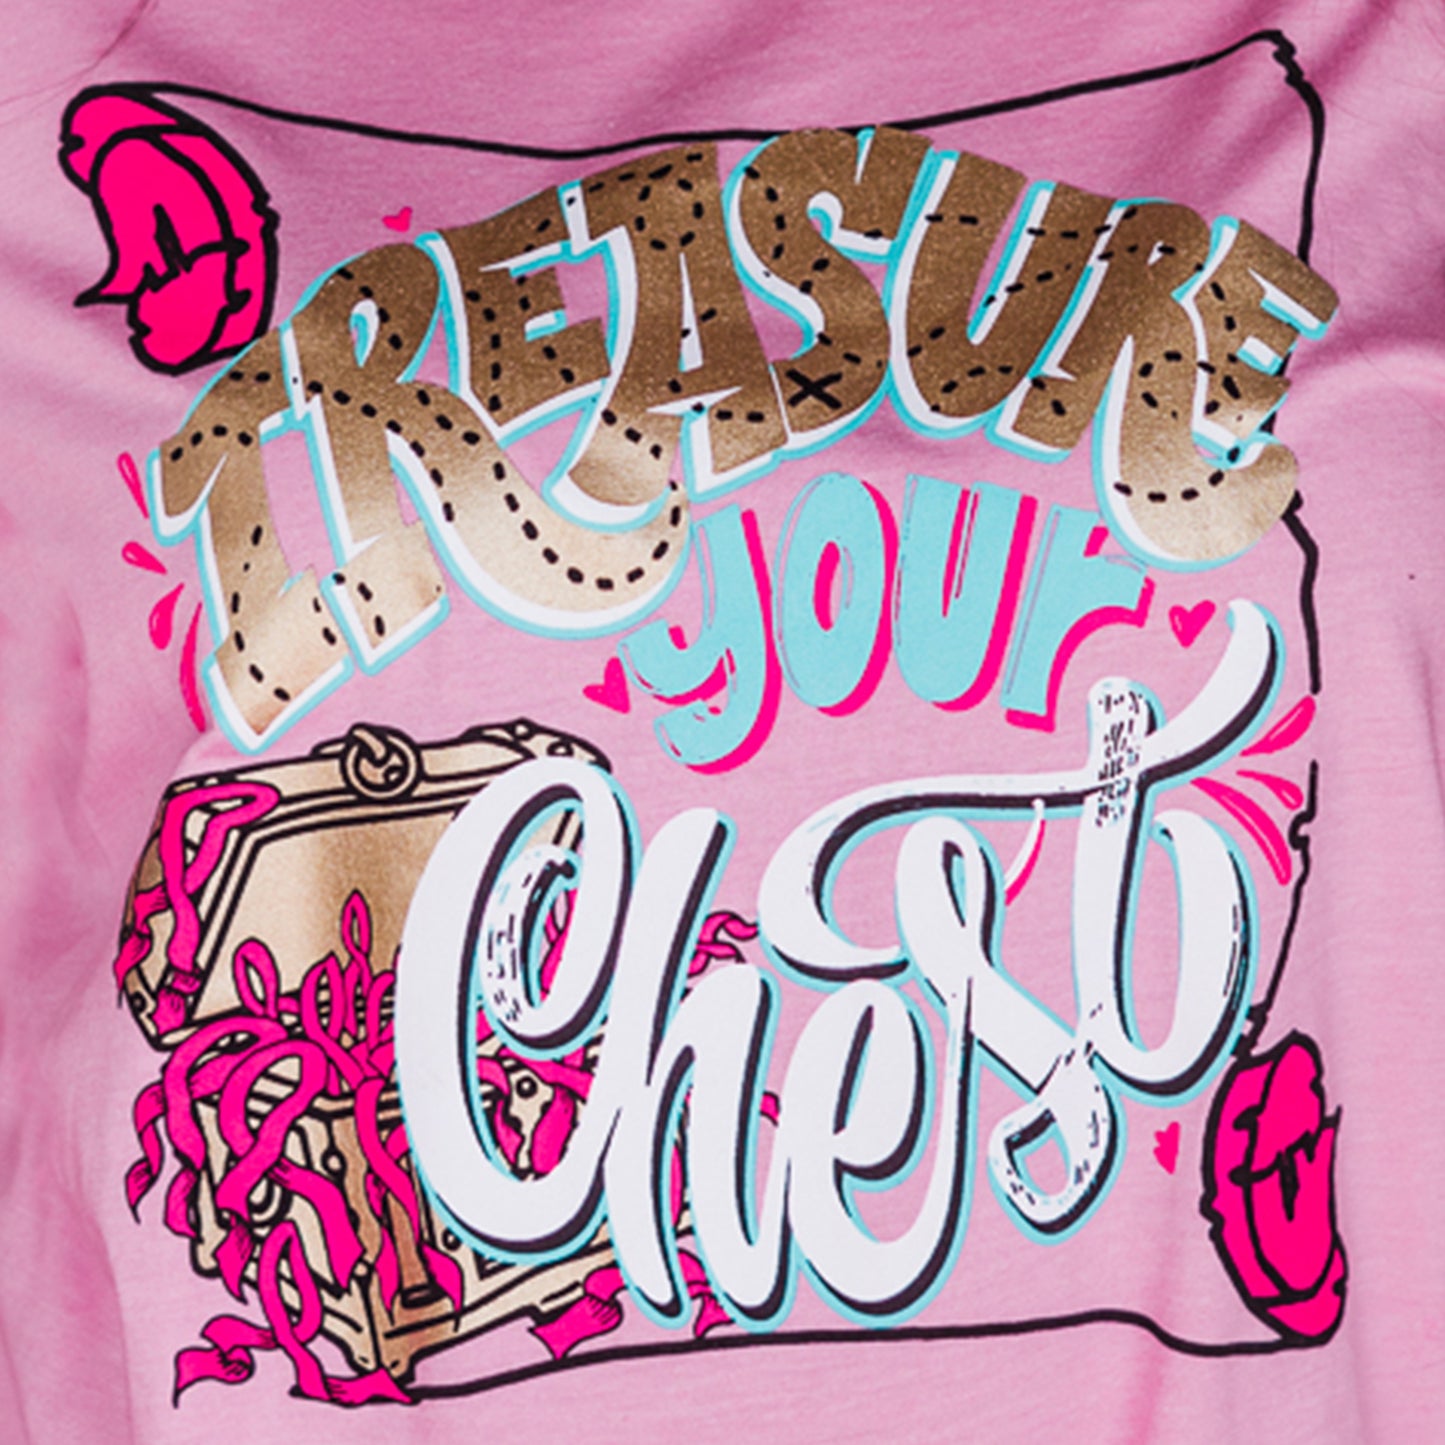 Treasure Your Chest Cancer Tee